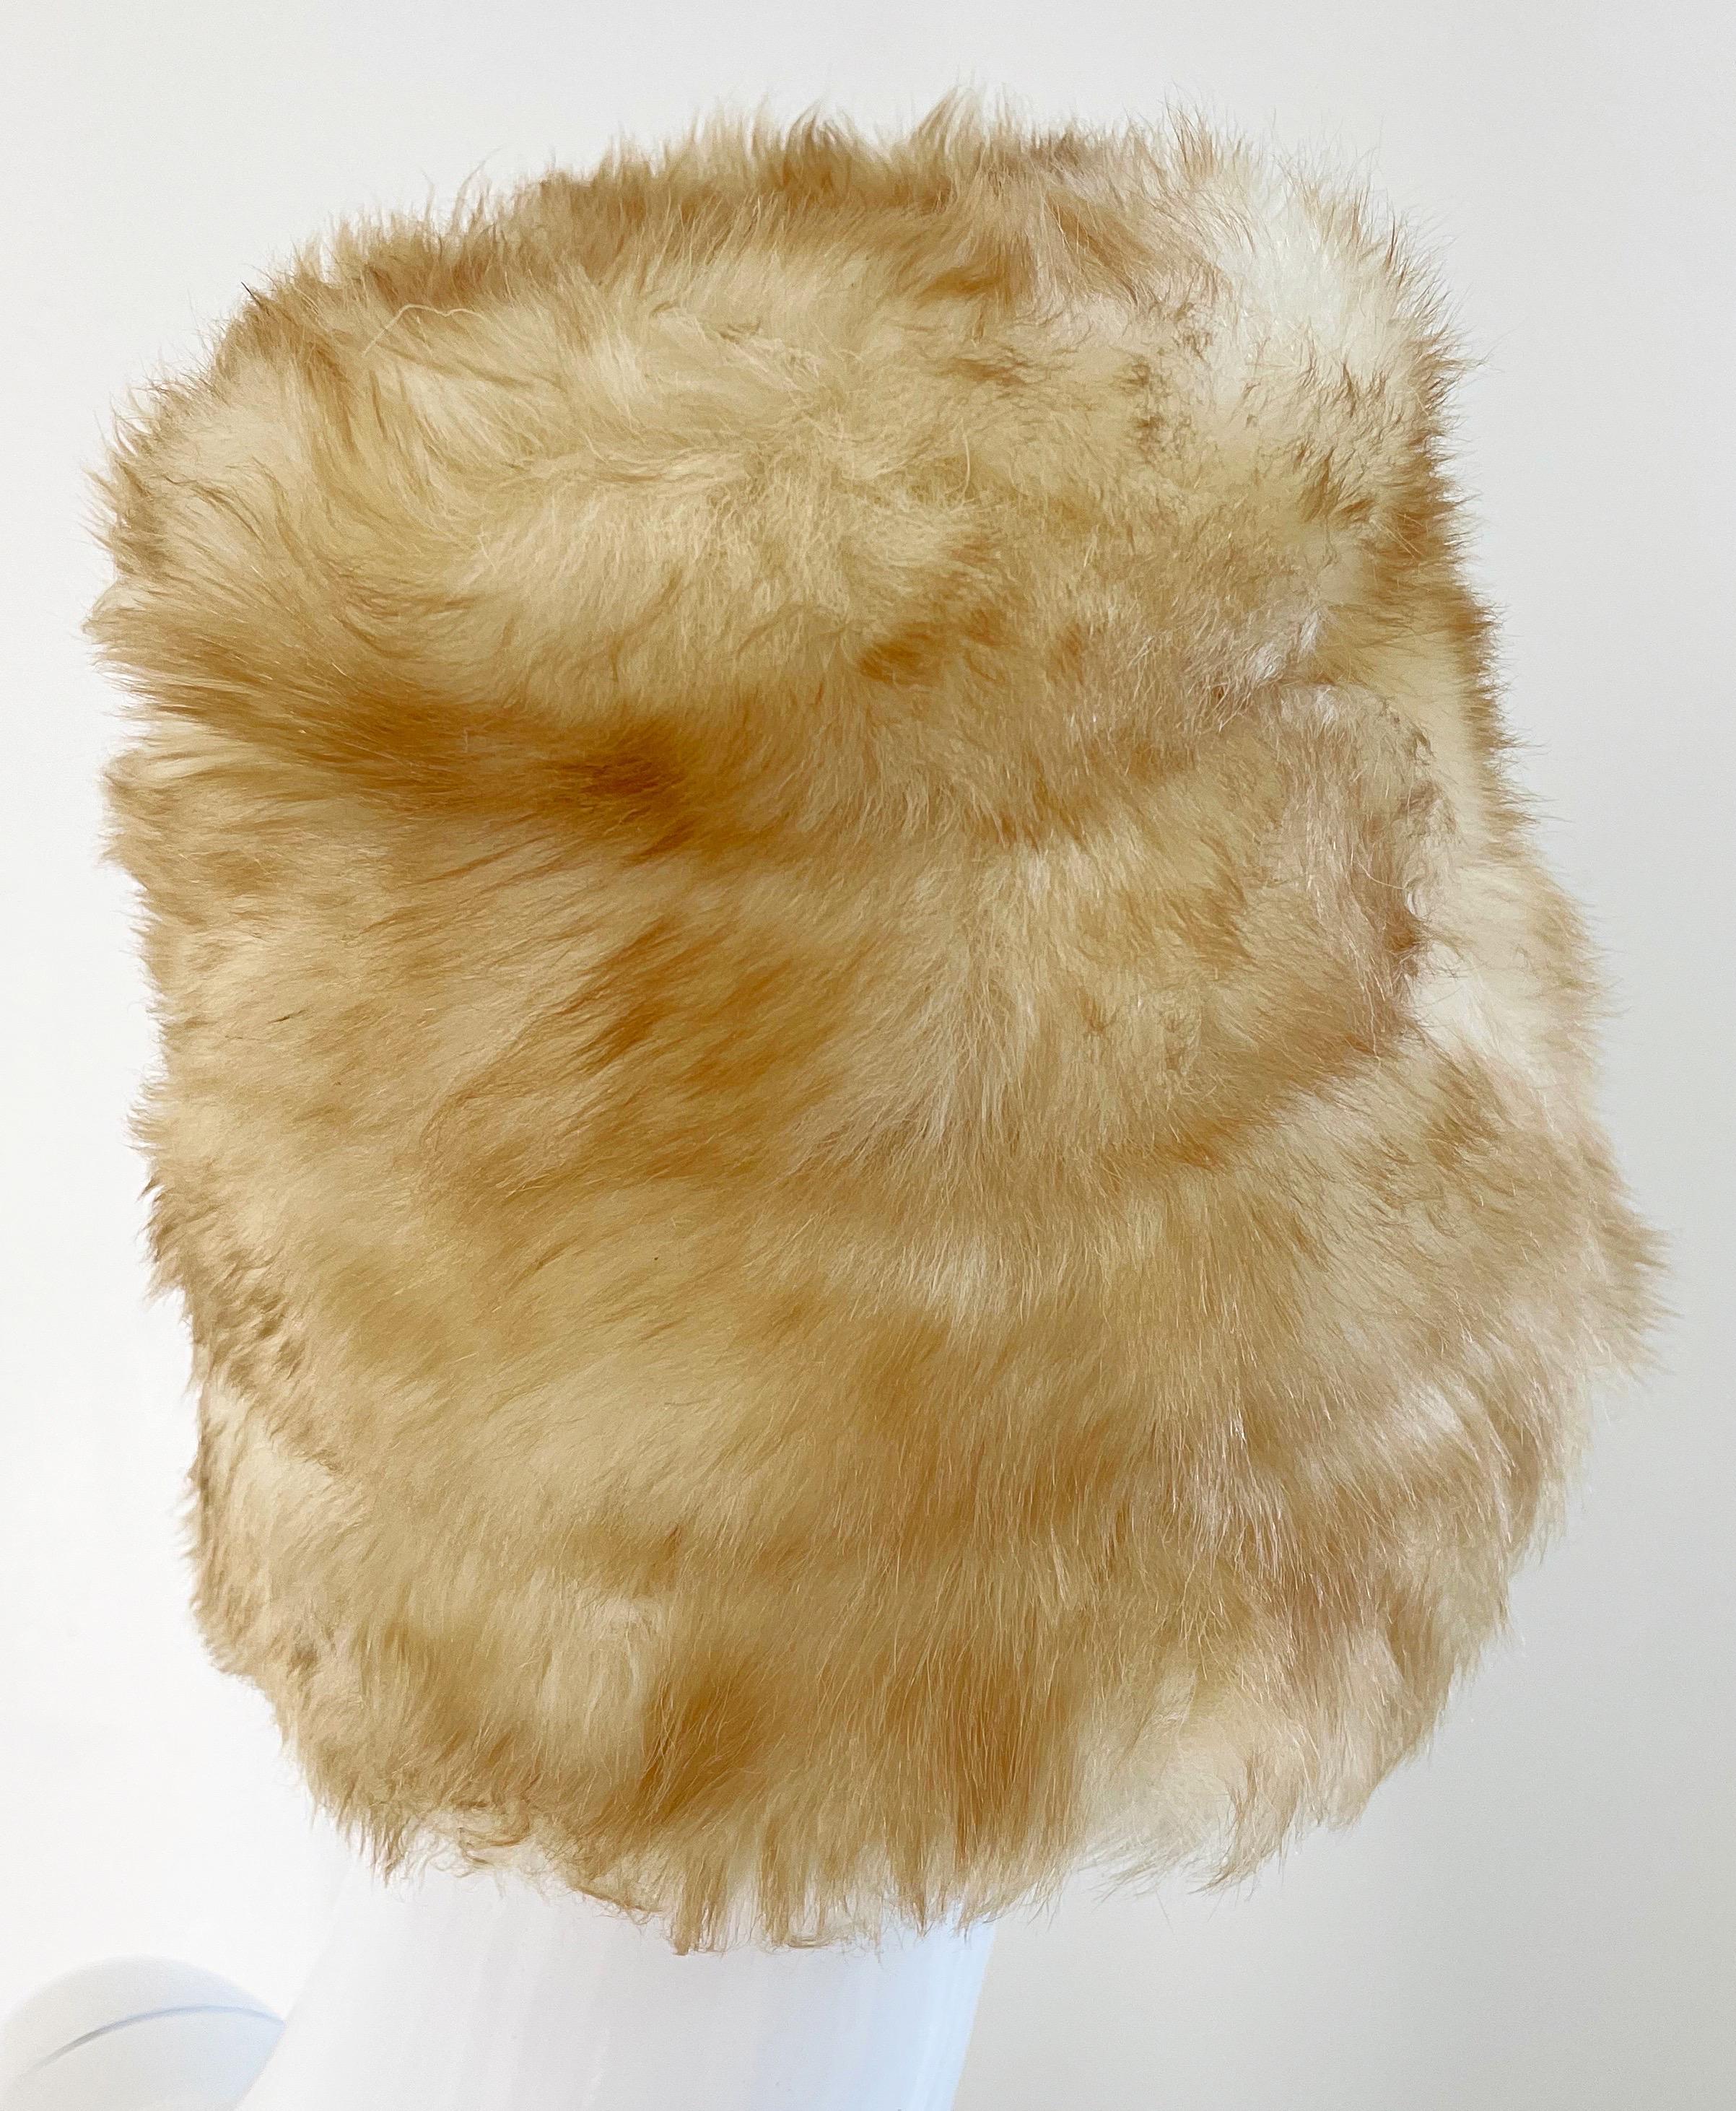 Yves Saint Laurent Fall 1976 Russian Collection Shearling Honey Tan Fur Hat 70s 7